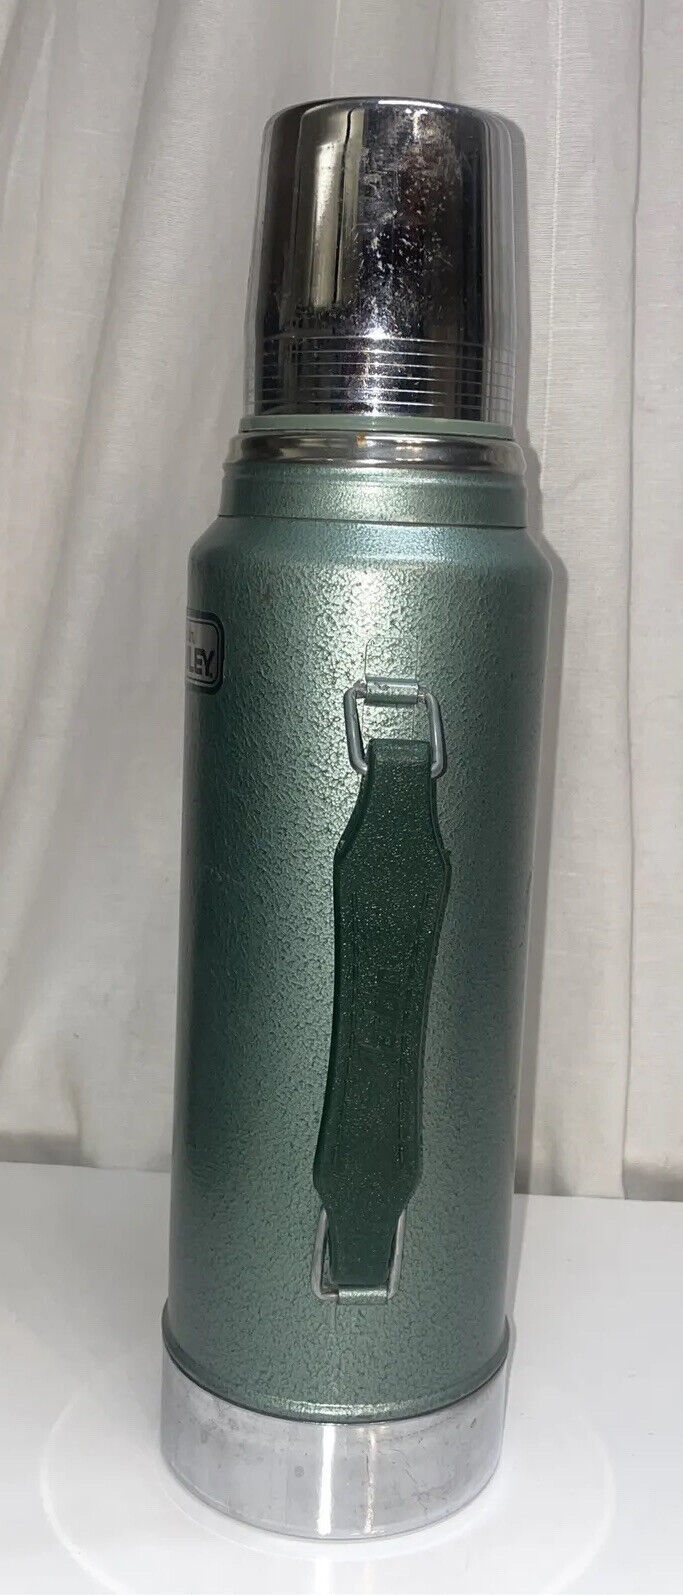 Vintage USA Aladdin Stanley Thermos LARGE 2 Qt. A-945DH Top Handle